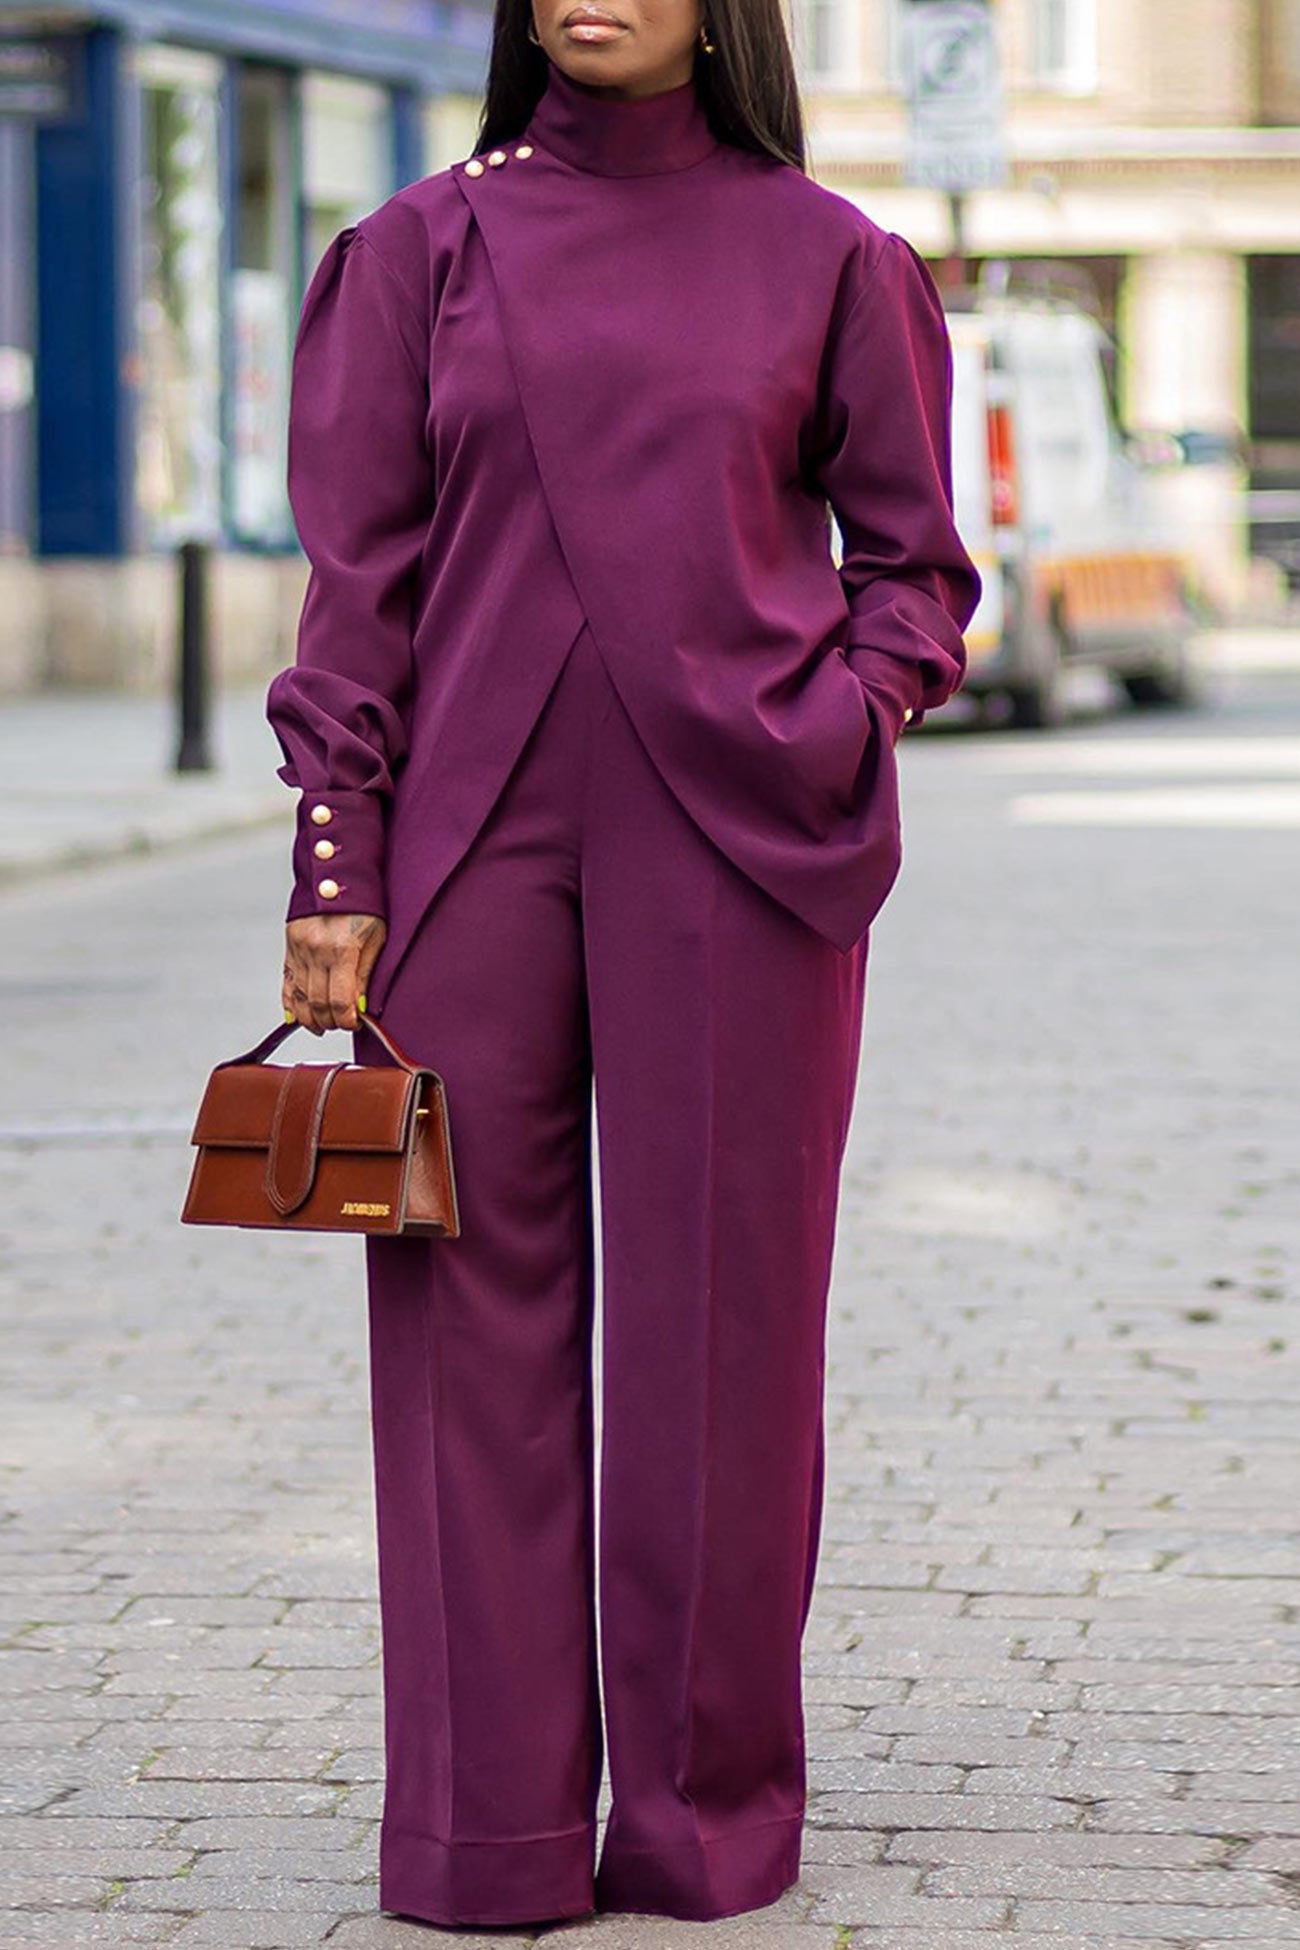 HOW TO STYLE A PANT SUIT FOR WOMEN  Pantsuit, Pant suits for women, Purple  suits